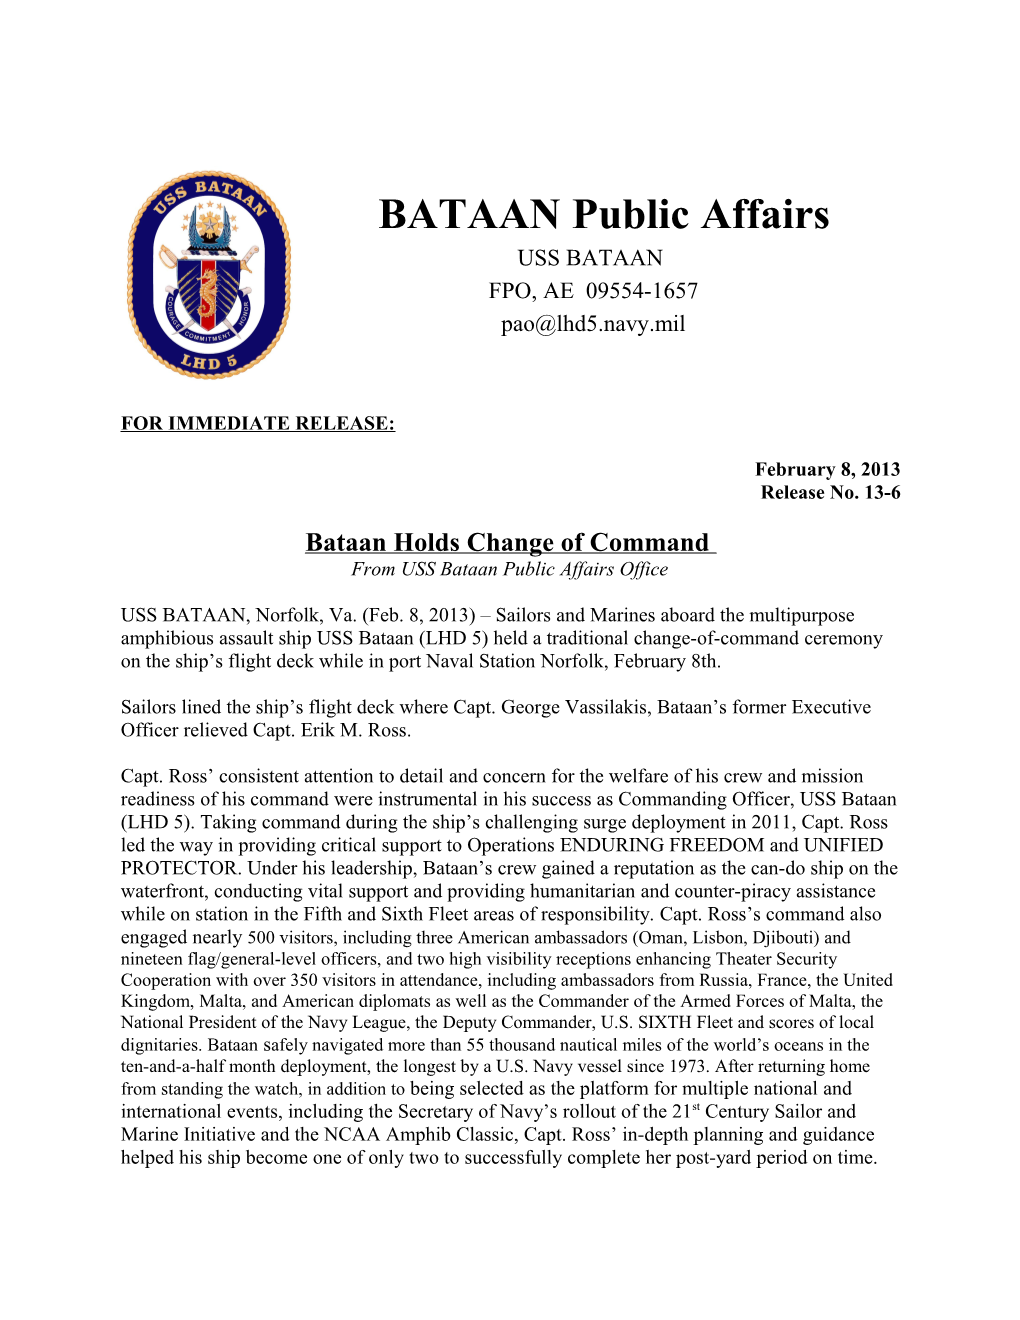 Bataan Holds Change of Command